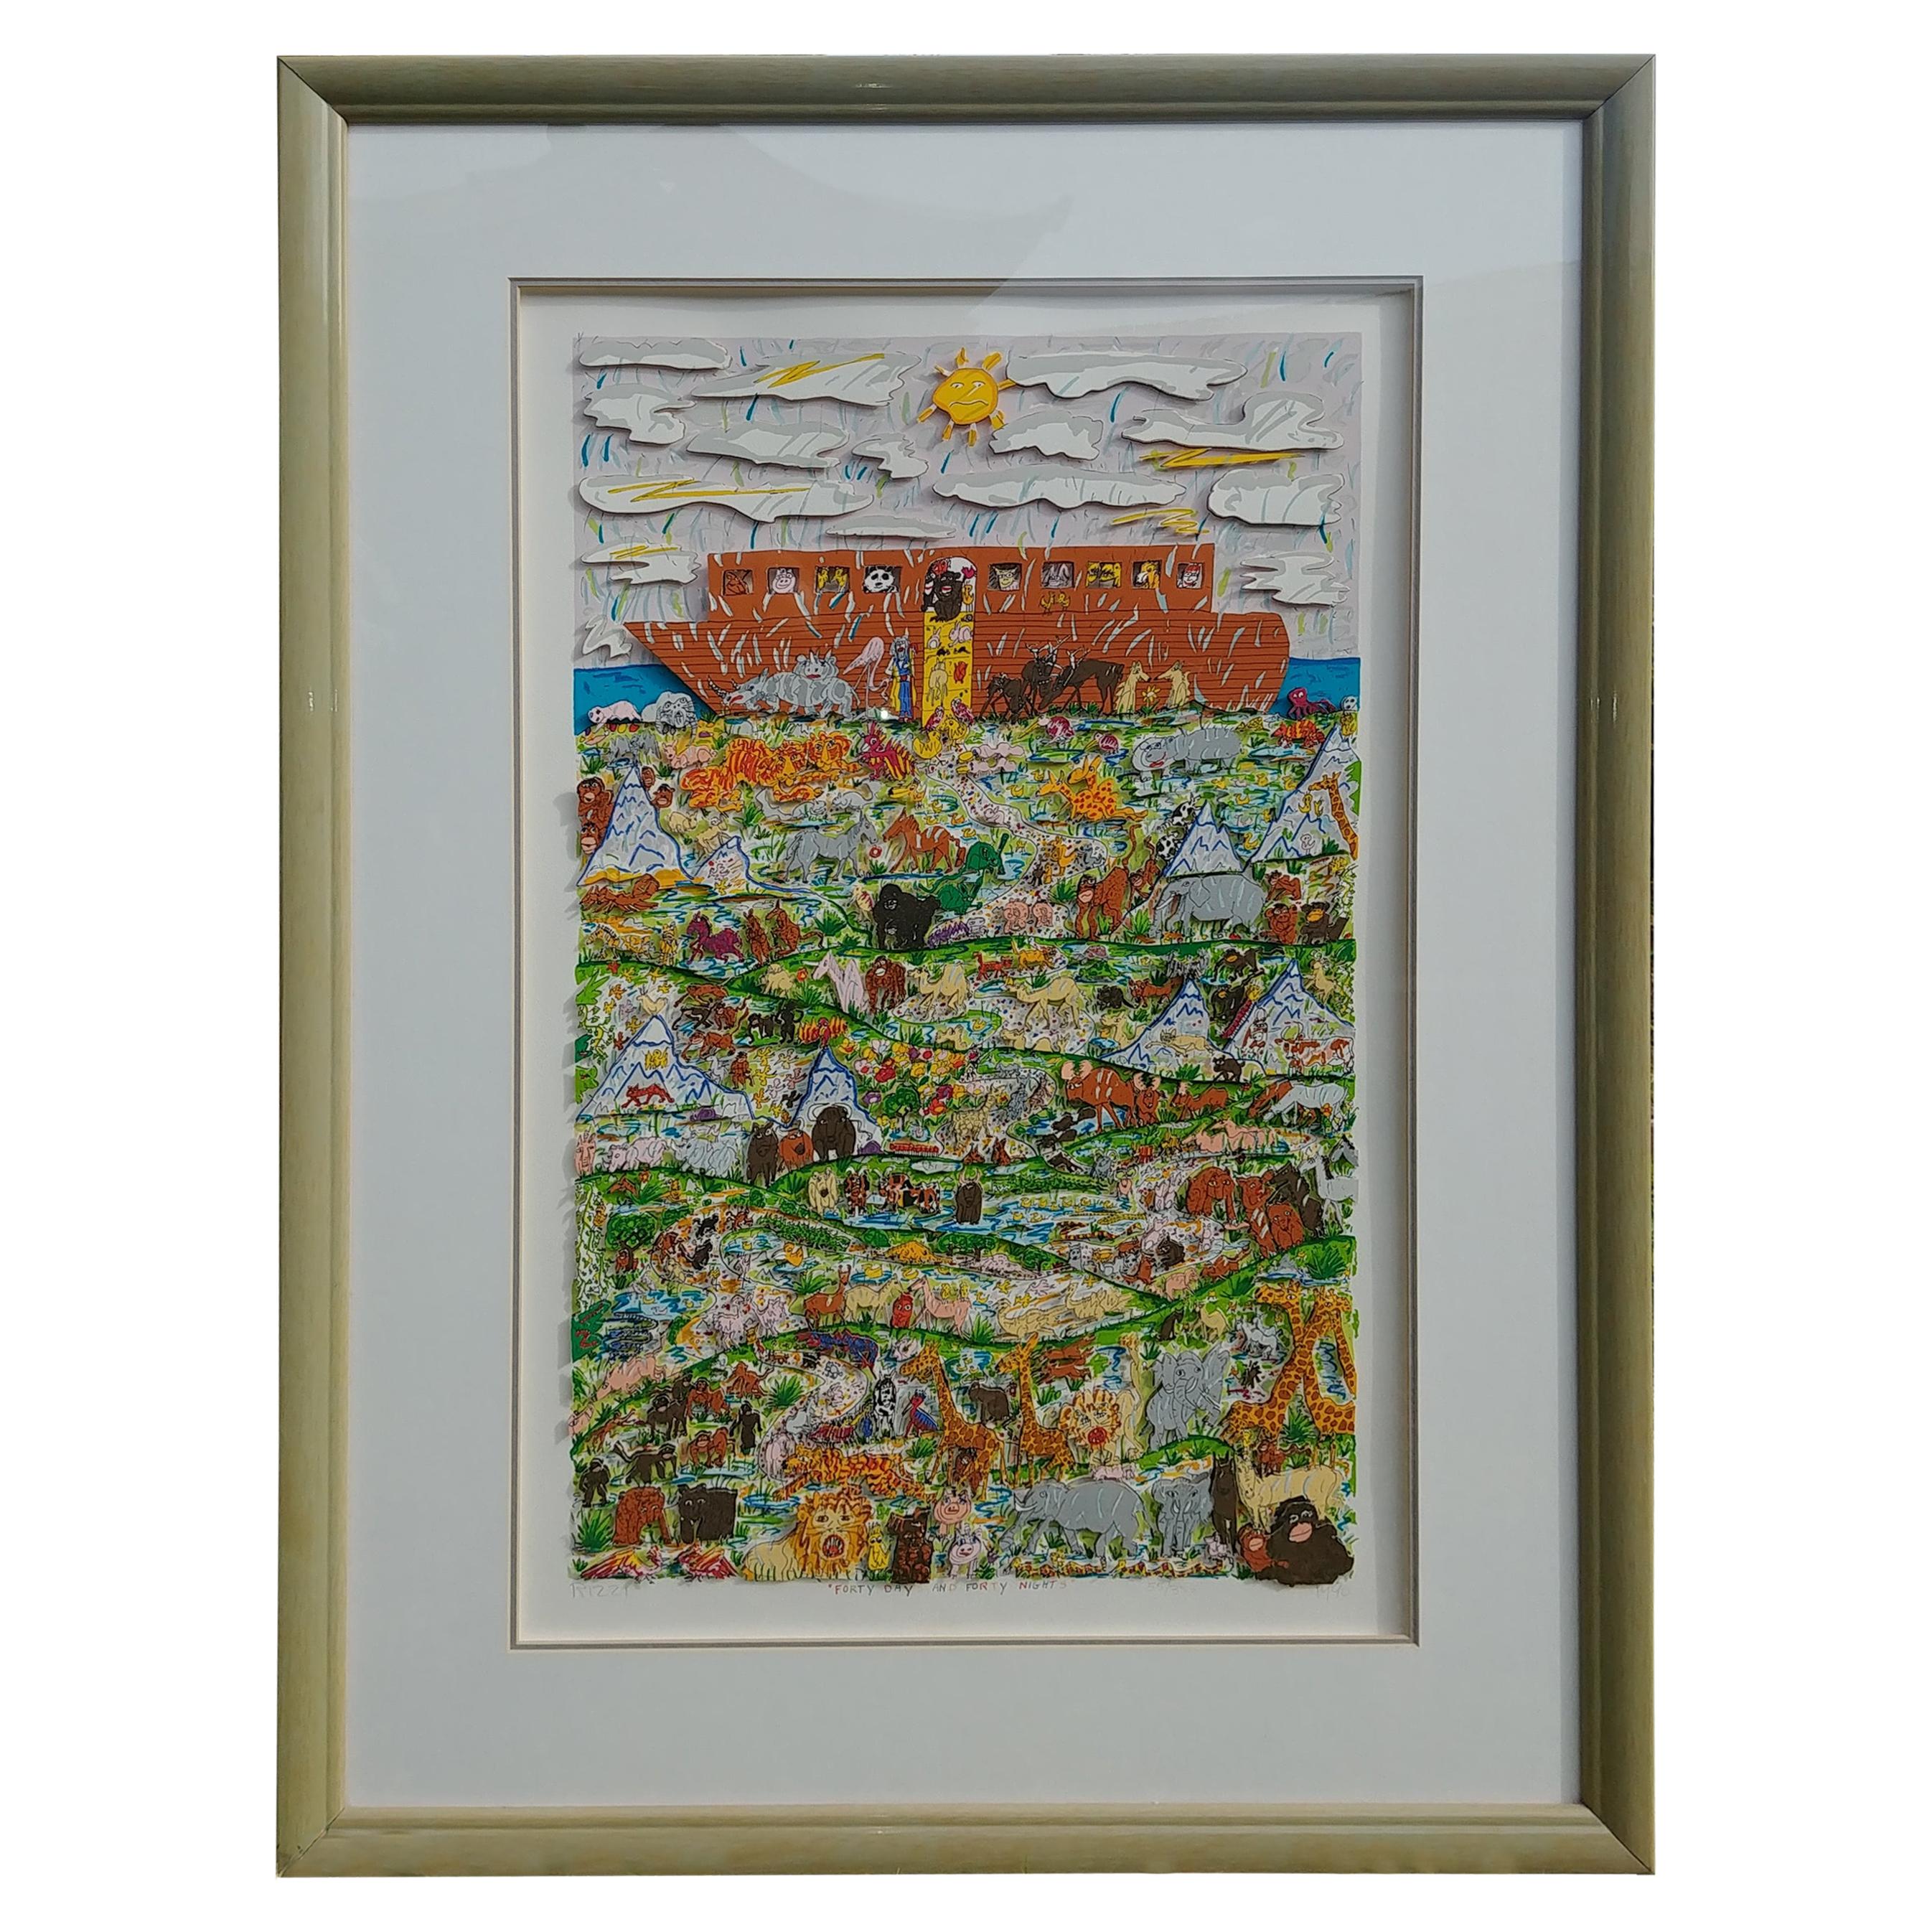 James Rizzi, 3D Pop Art" Forty Days and Forty Nights" Screen Print, Signed Dated